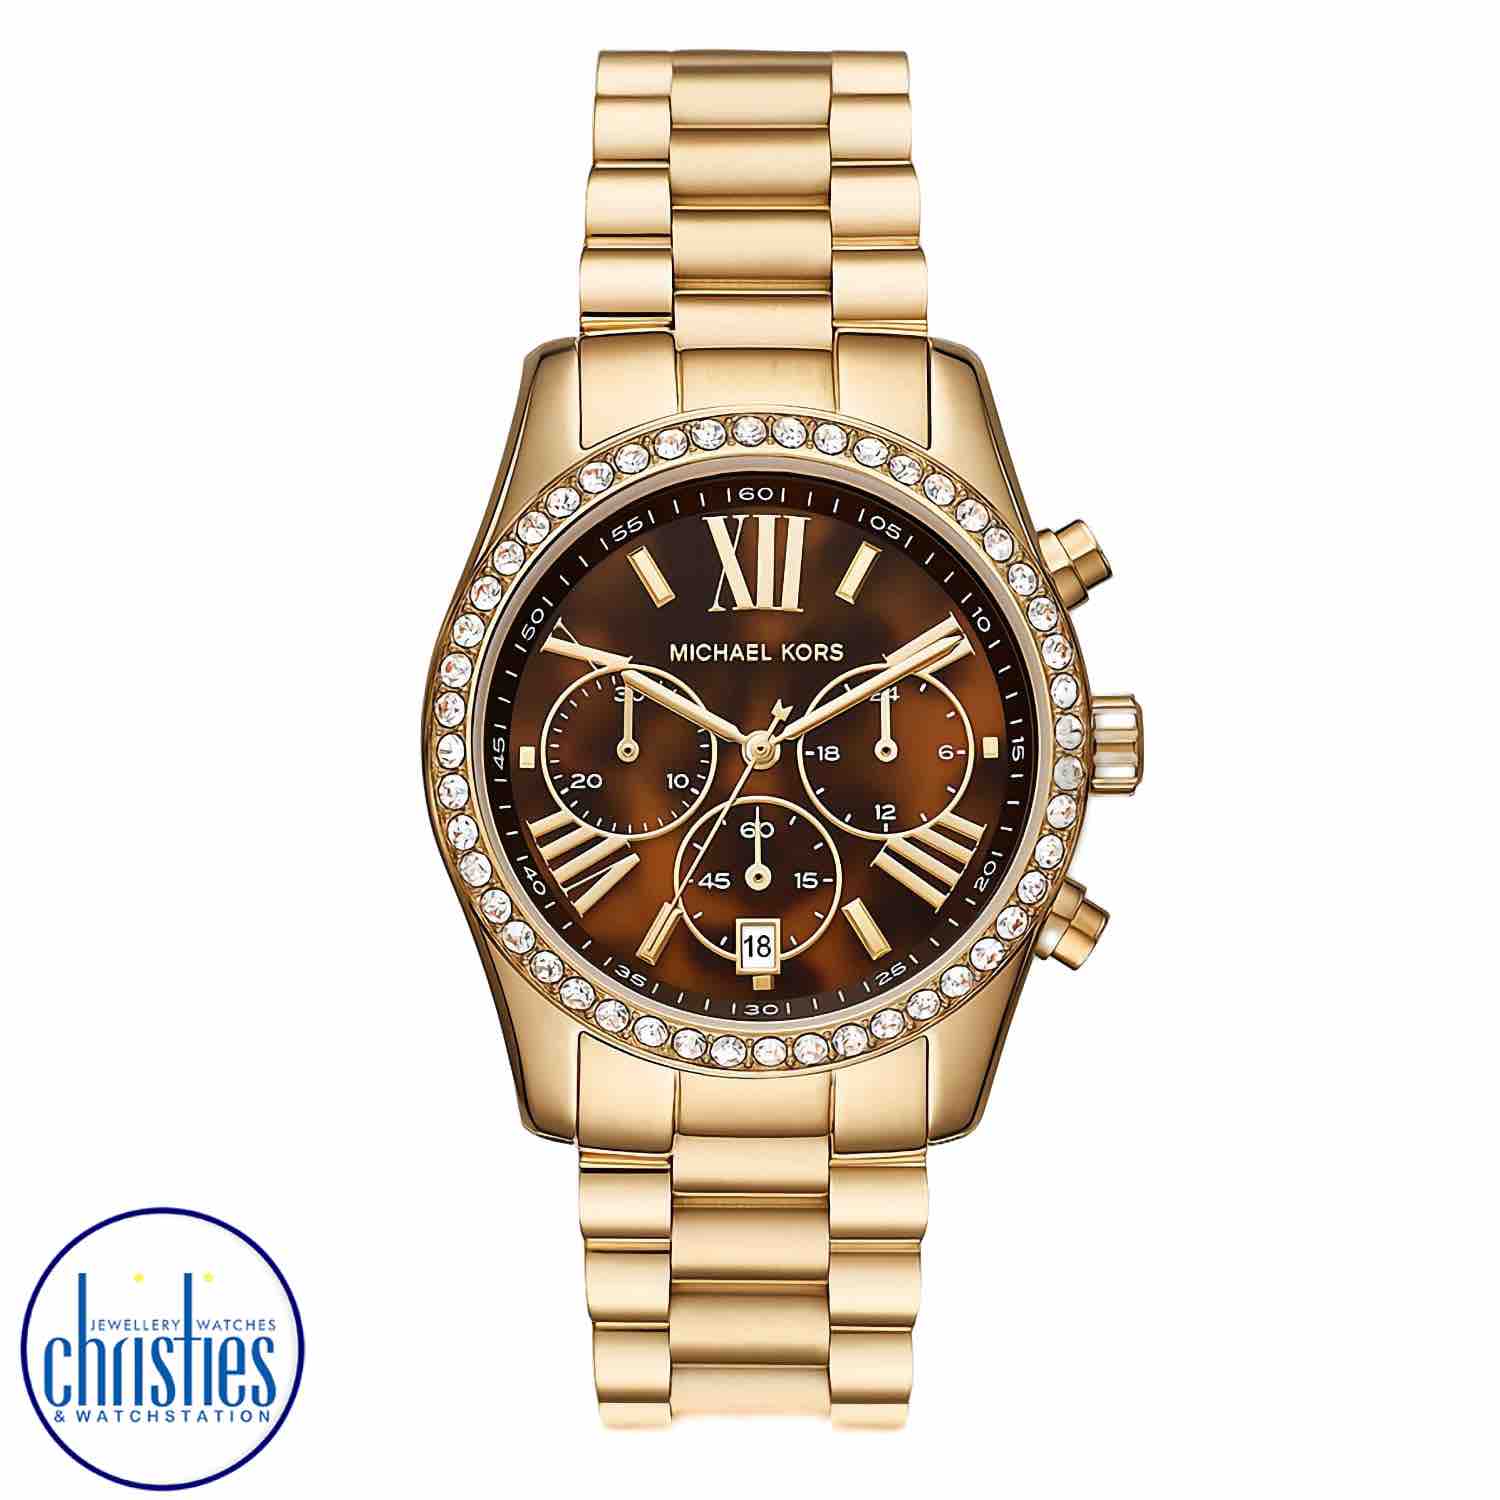 MK7276 Michael Kors Lexington Lux Chronograph Gold-Tone Watch. MK7276 Michael Kors Lexington Lux Chronograph Gold-Tone Stainless Steel WatchAfterpay - Split your purchase into 4 instalments - Pay for your purchase over 4 instalments, due every two weeks.